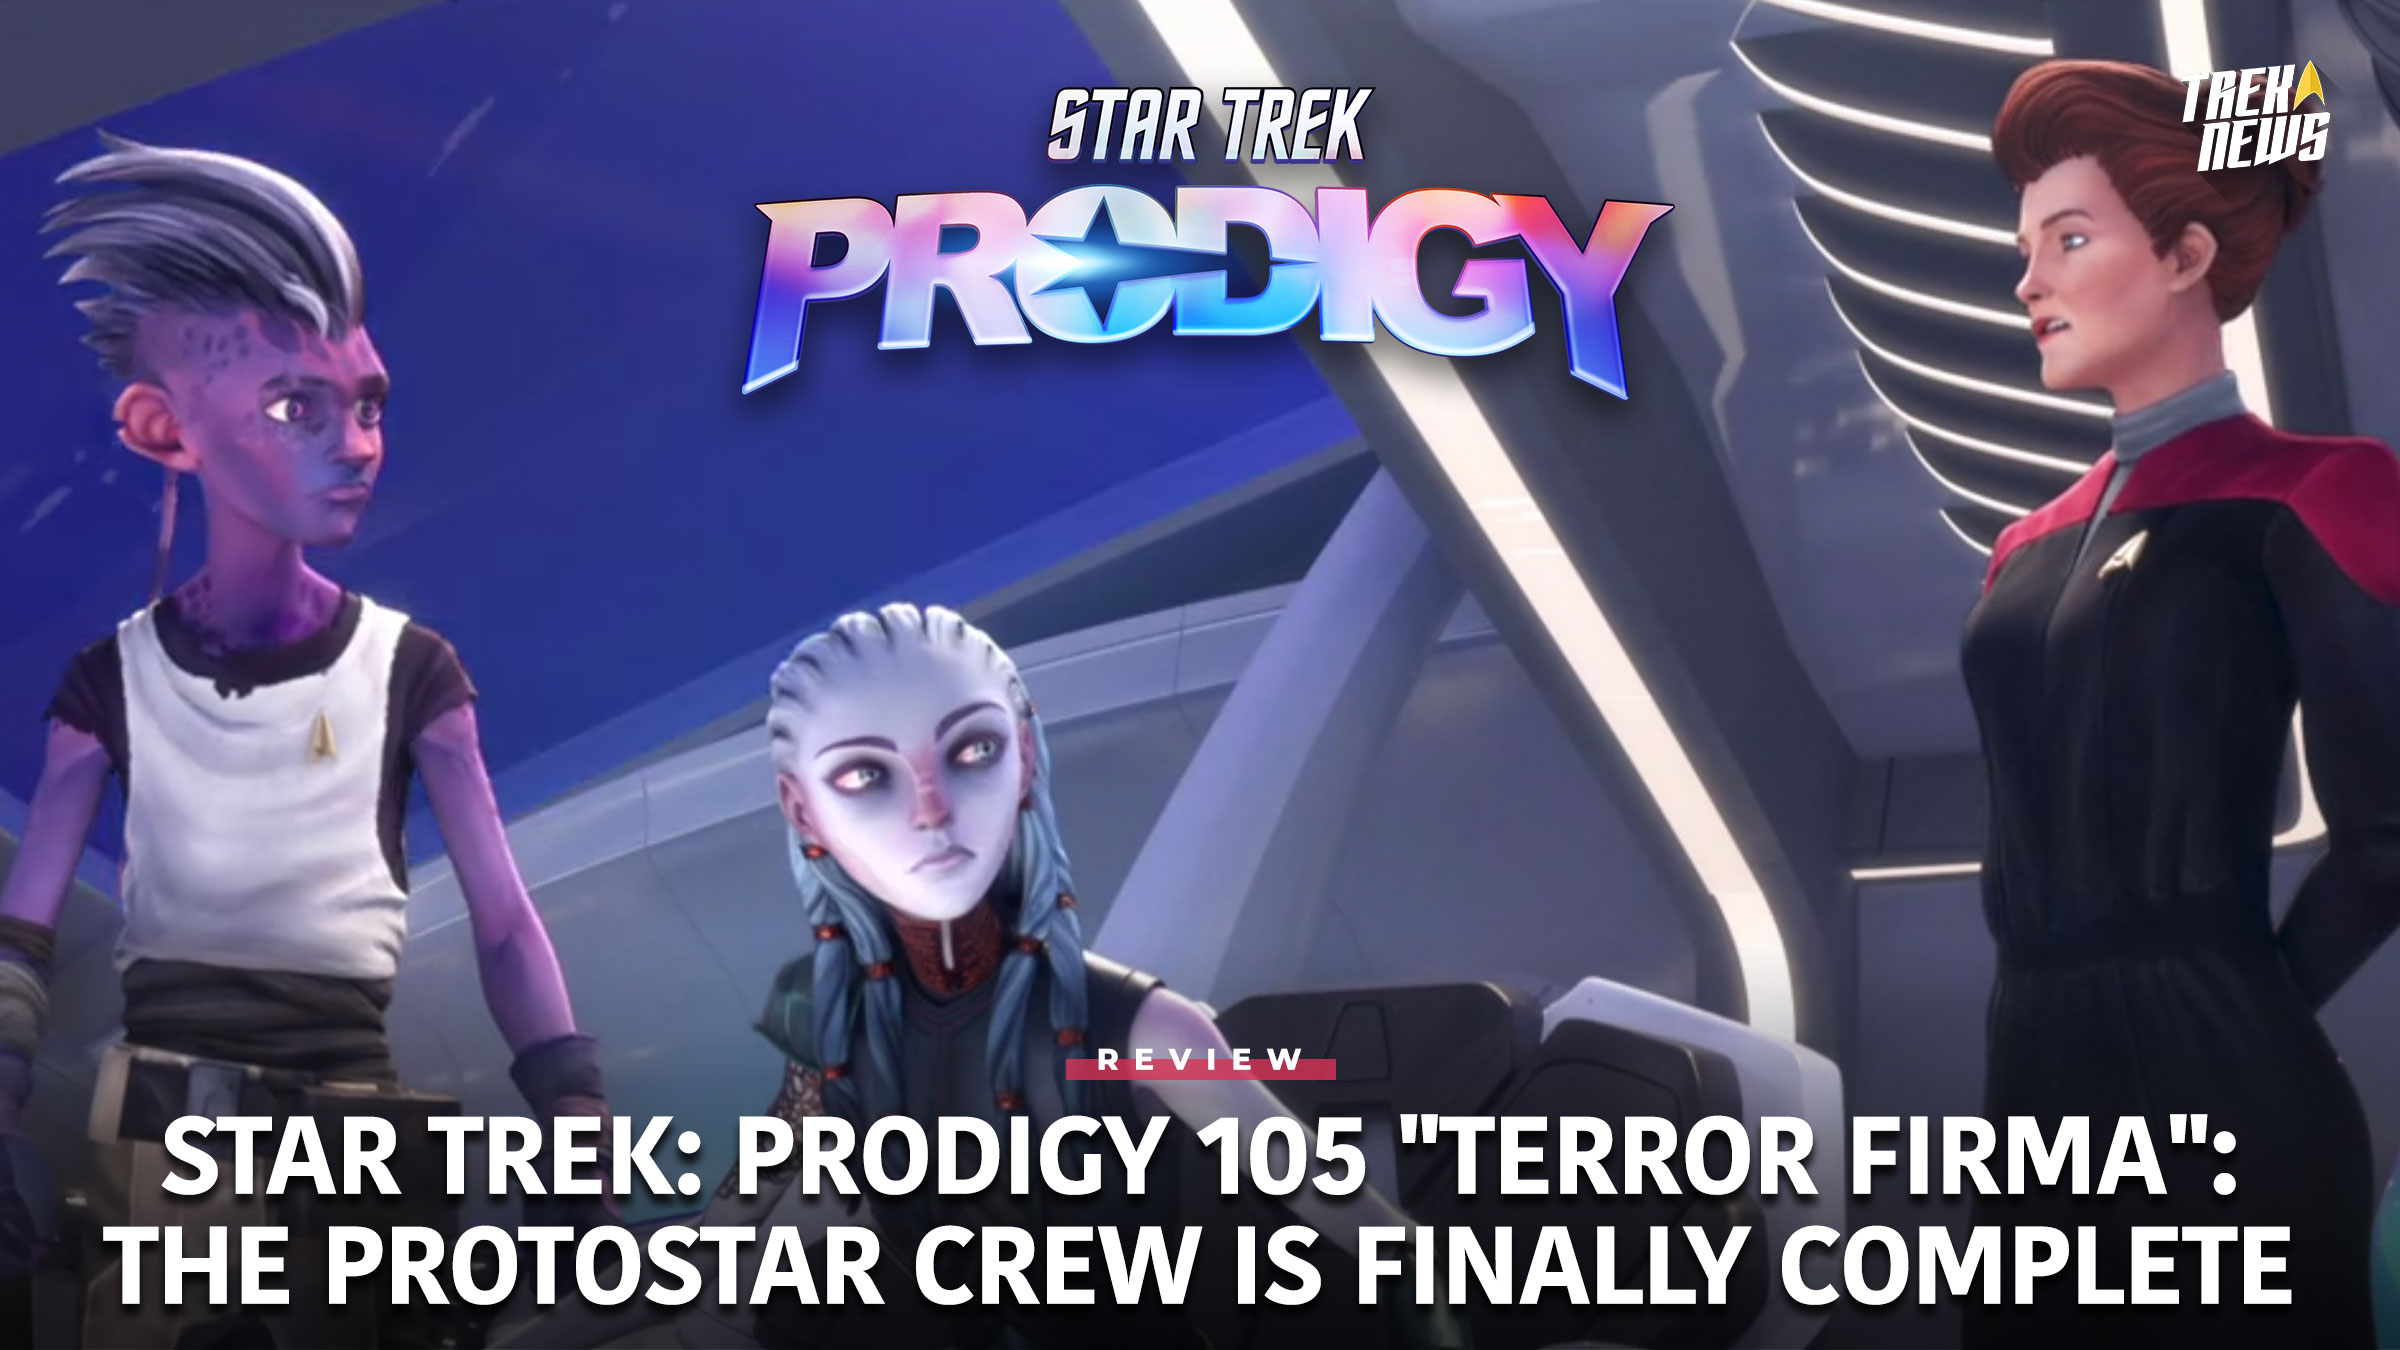 Star Trek: Prodigy Episode 105 “Terror Firma” Review: The Protostar Crew Is Finally Complete